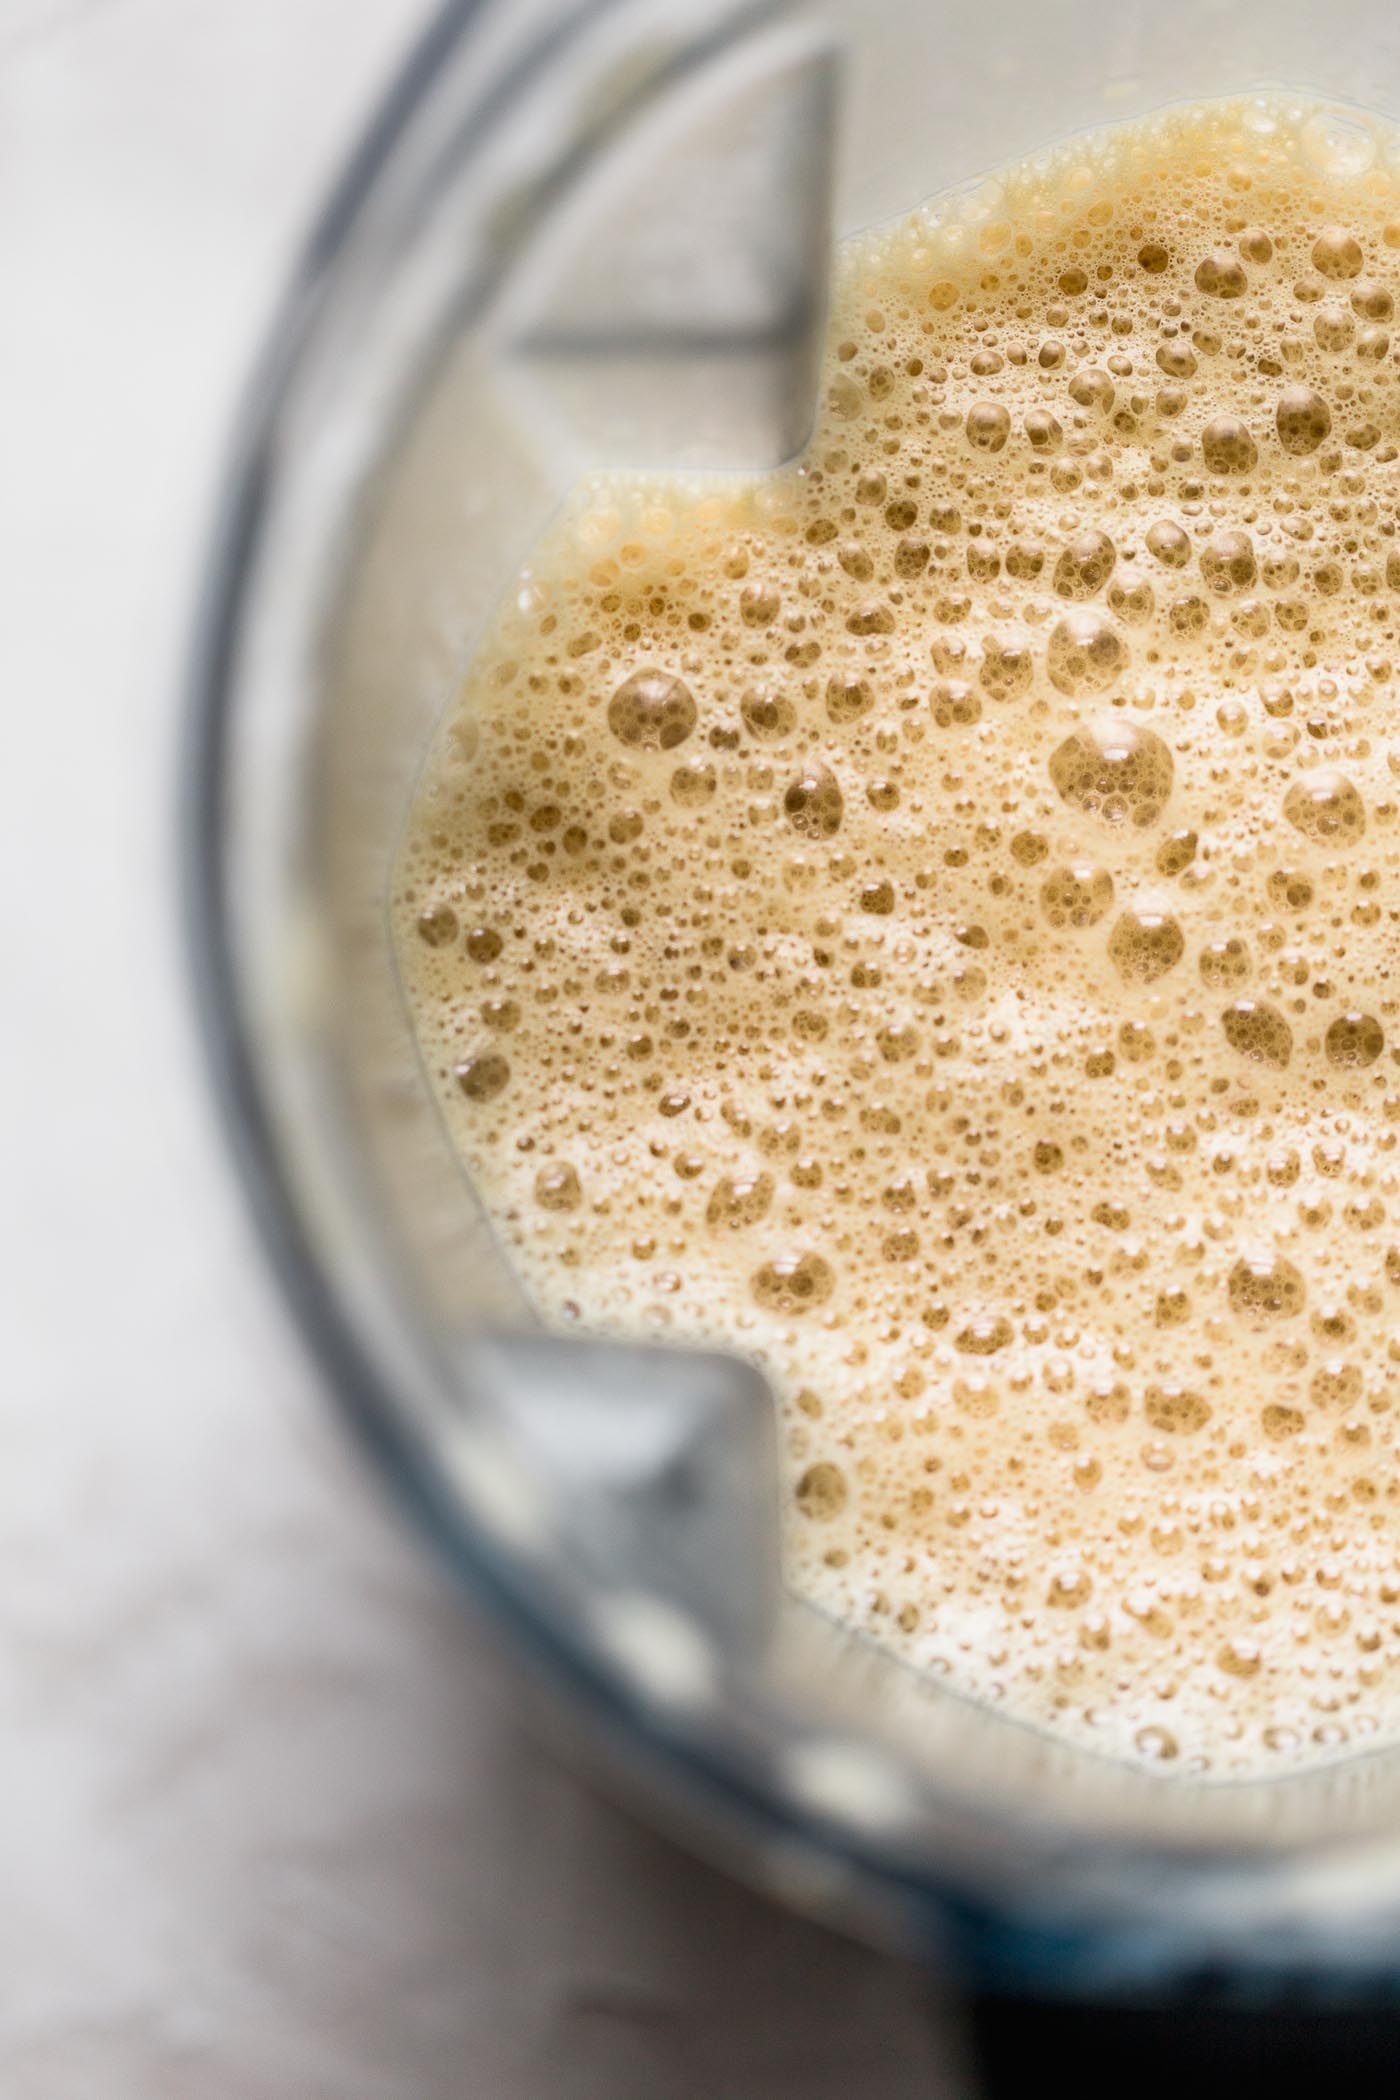 a bulletproof coffee protein latte recipe for a dreamy, creamy, healthy latte that is beyond delicious. this healthy bulletproof coffee latte is full of satisfying protein from your favorite whey or plant-based protein powder & healthy fats from coconut oil. the best part is how completely easy to make at home! paleo friendly. whole30 friendly. #playswellwithbutter #bulletproofcoffeerecipe #proteinlatte #proteindrink #healthycoffeerecipe #healthybreakfast #keto #ketodrink #paleobreakfast #paleodrink